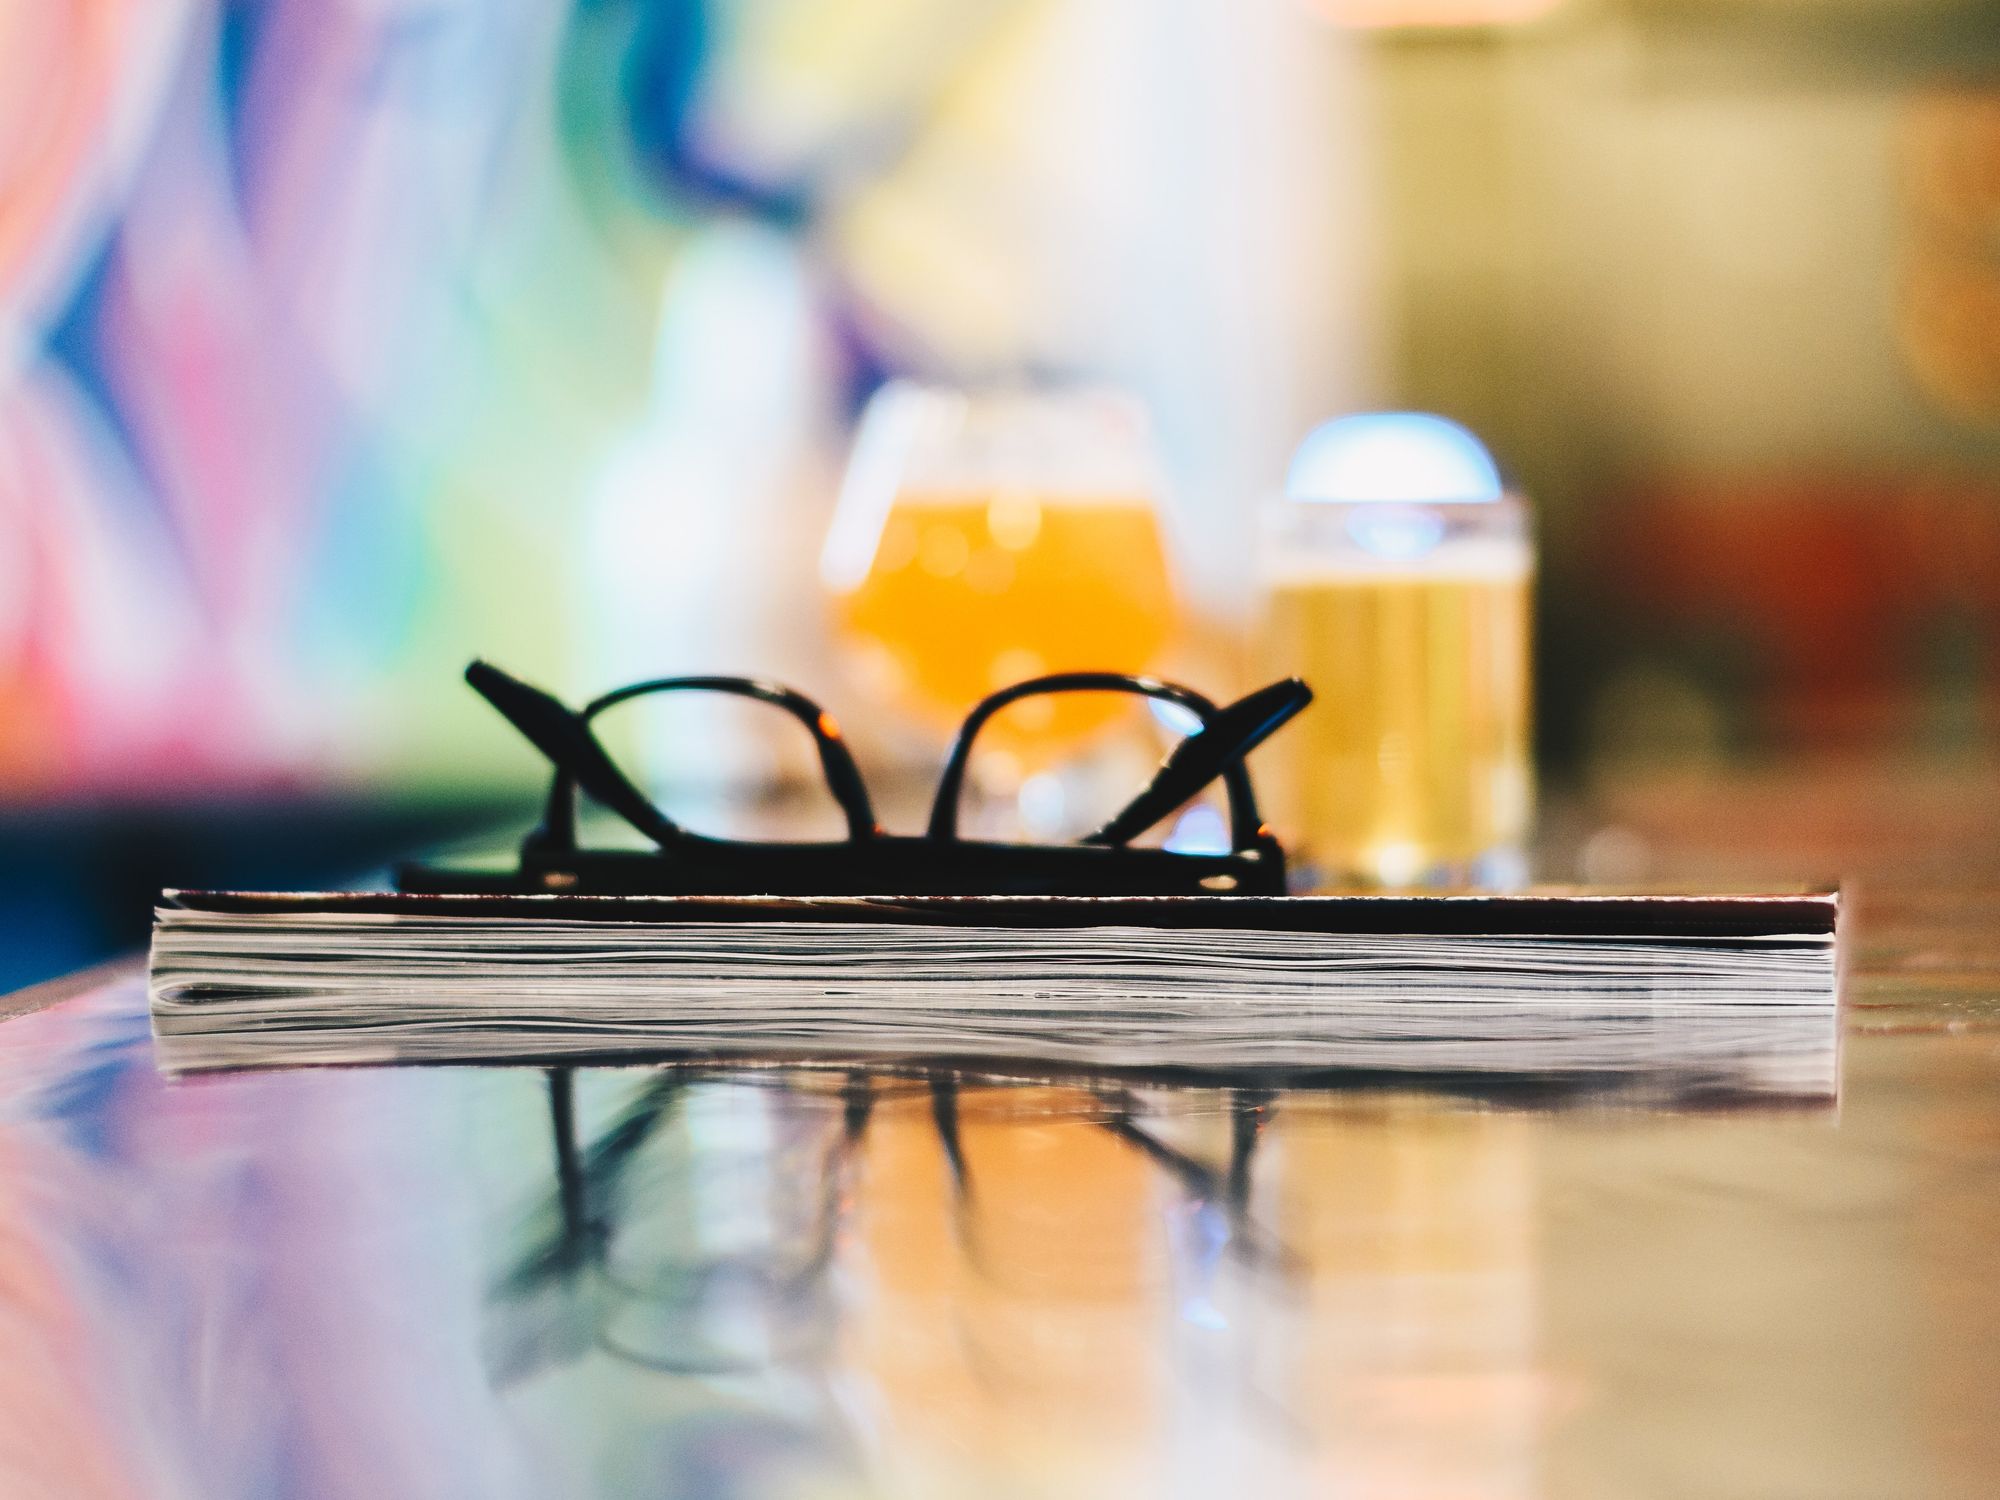 Glasses and book on counter